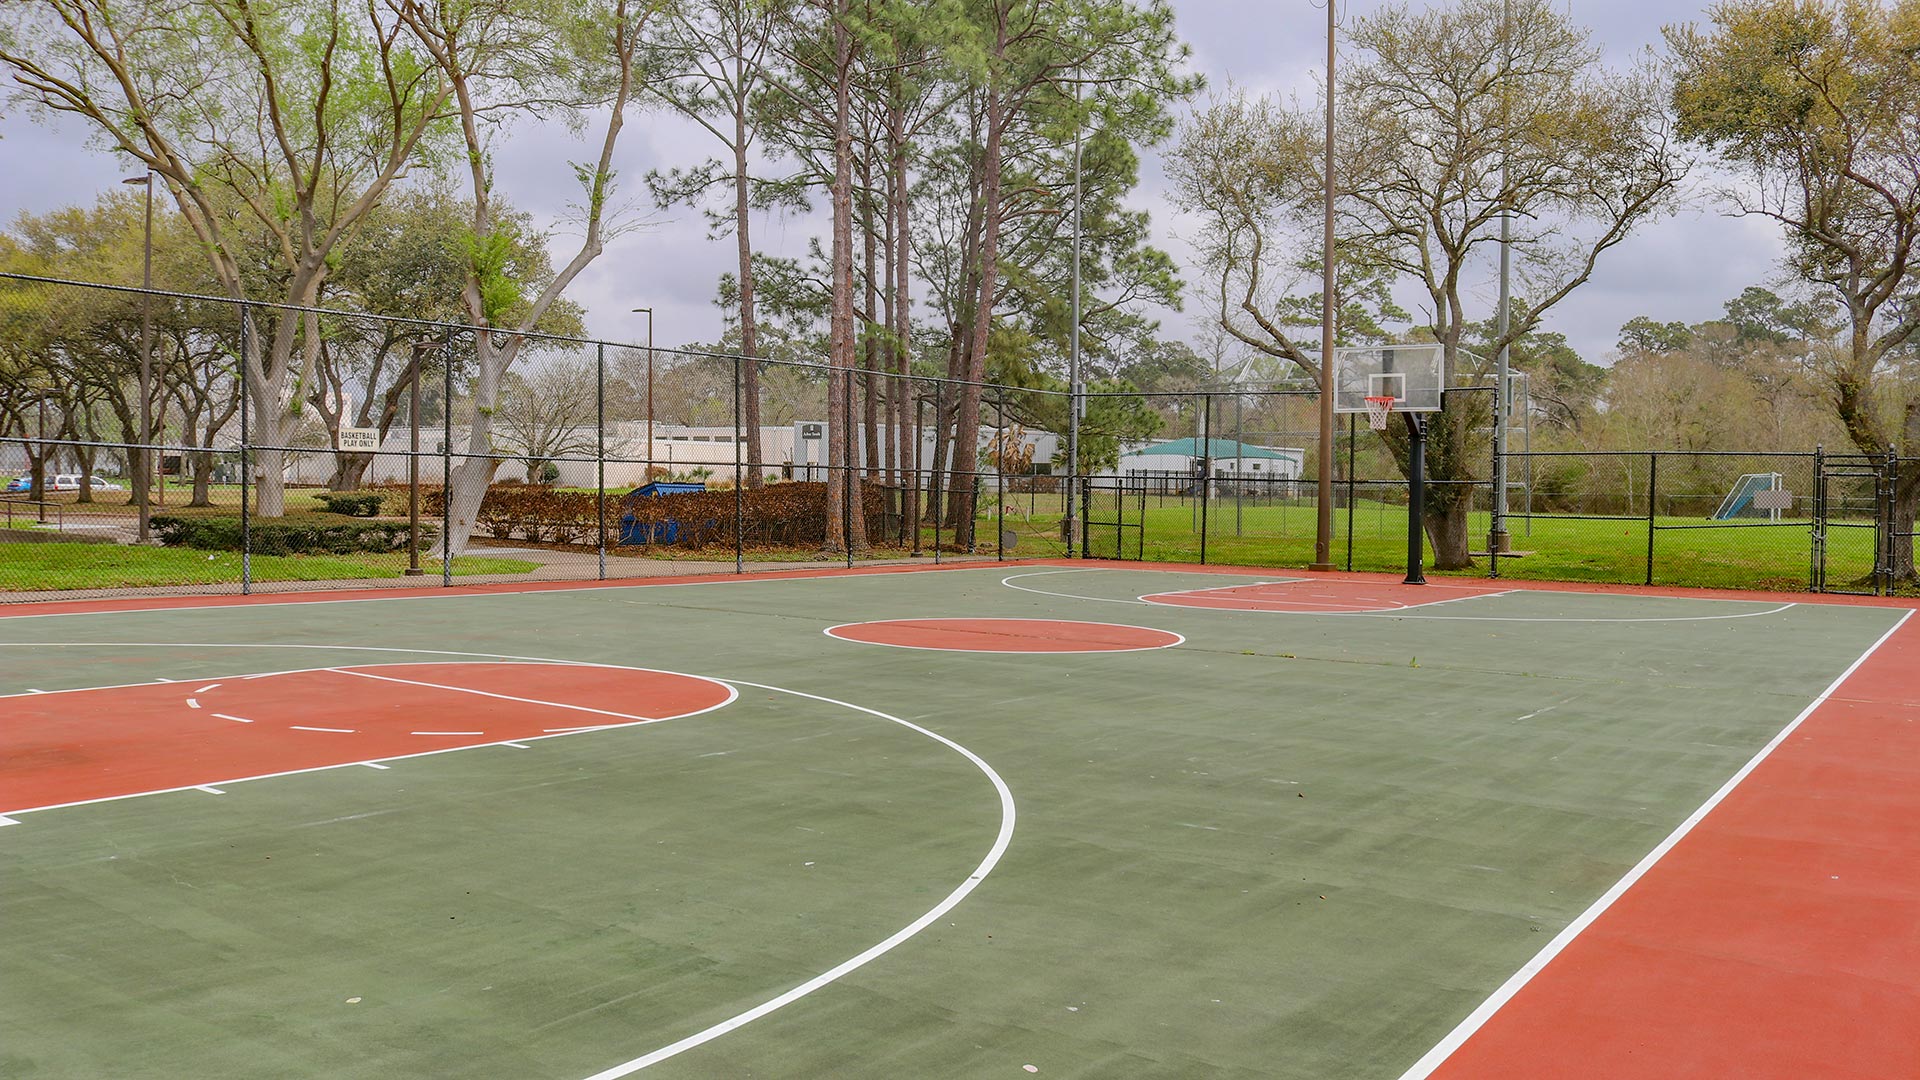 Basketball courts at the Delta Field Complex